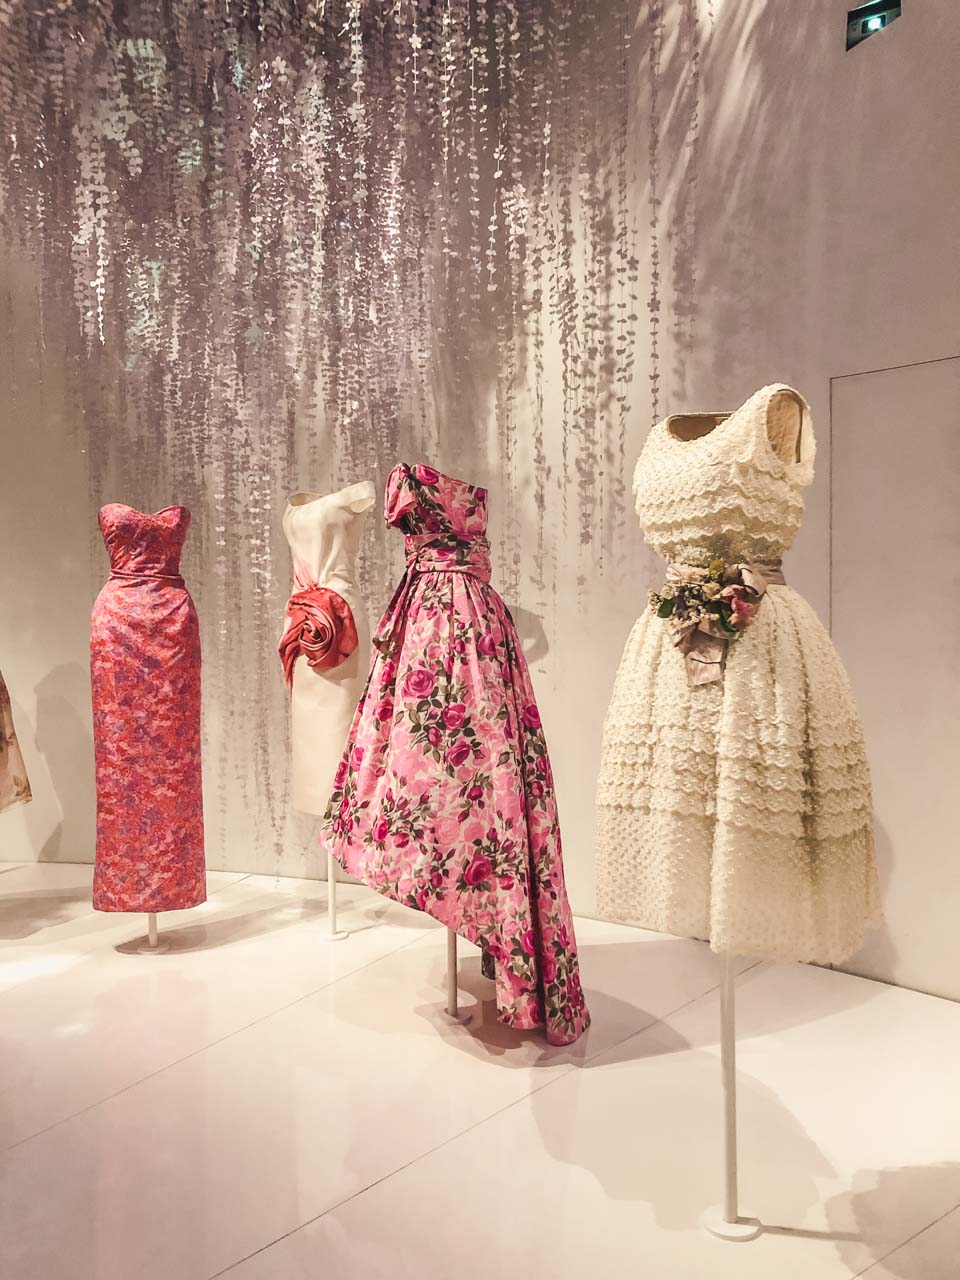 Dior gowns on display in the garden room of the Dior exhibition at the Victoria and Albert Museum in London